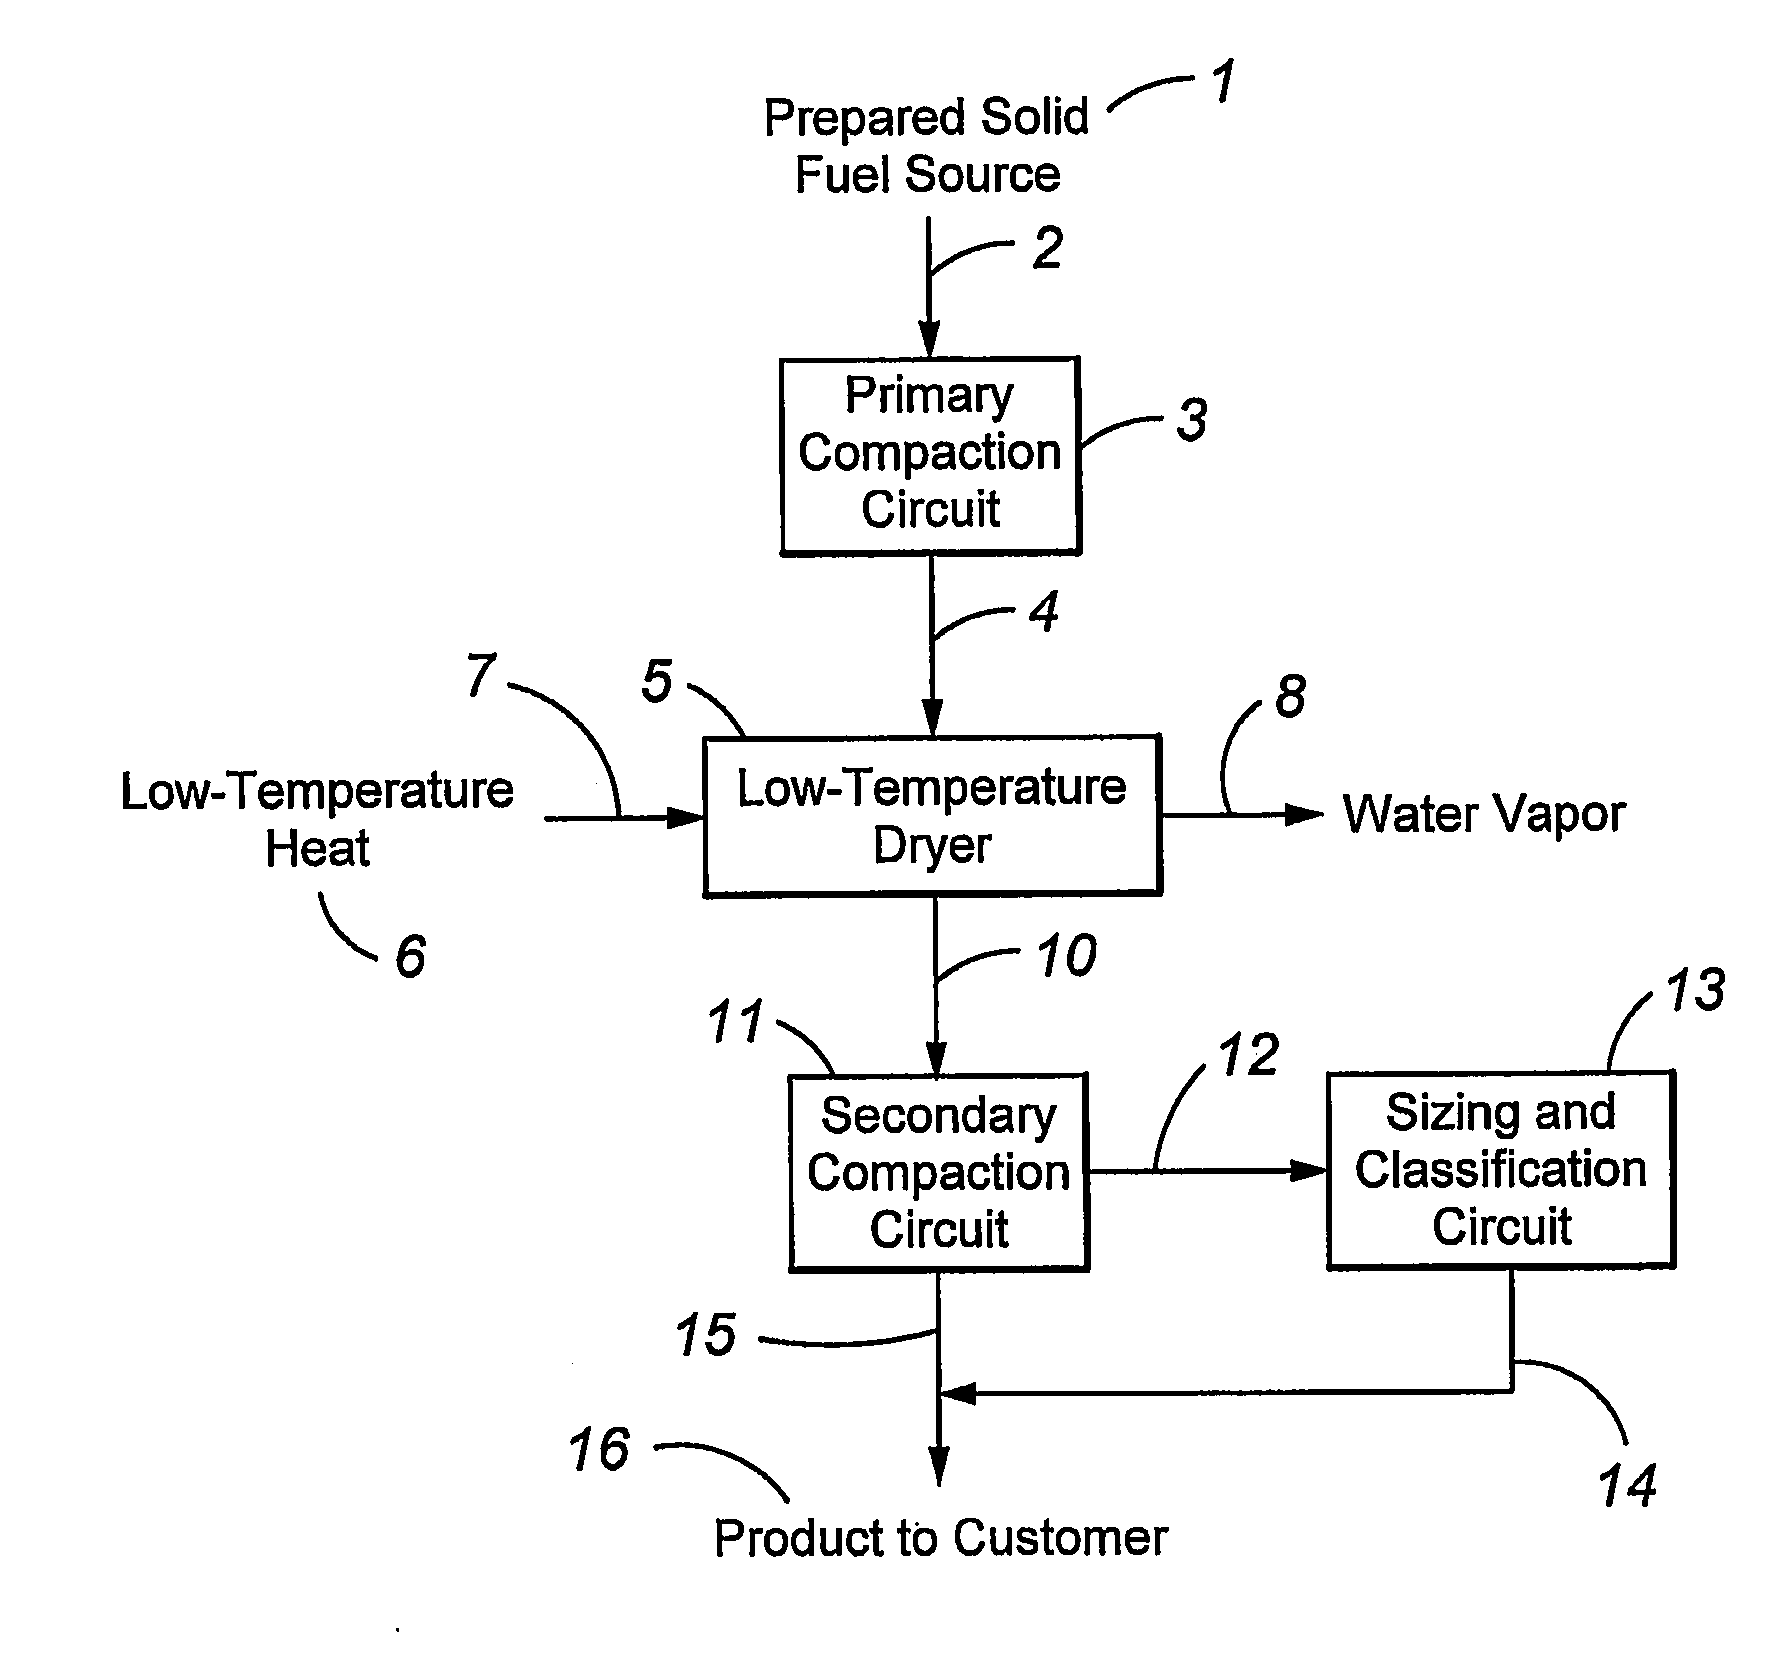 Methods of Producing Water-Resistant Solid Fuels